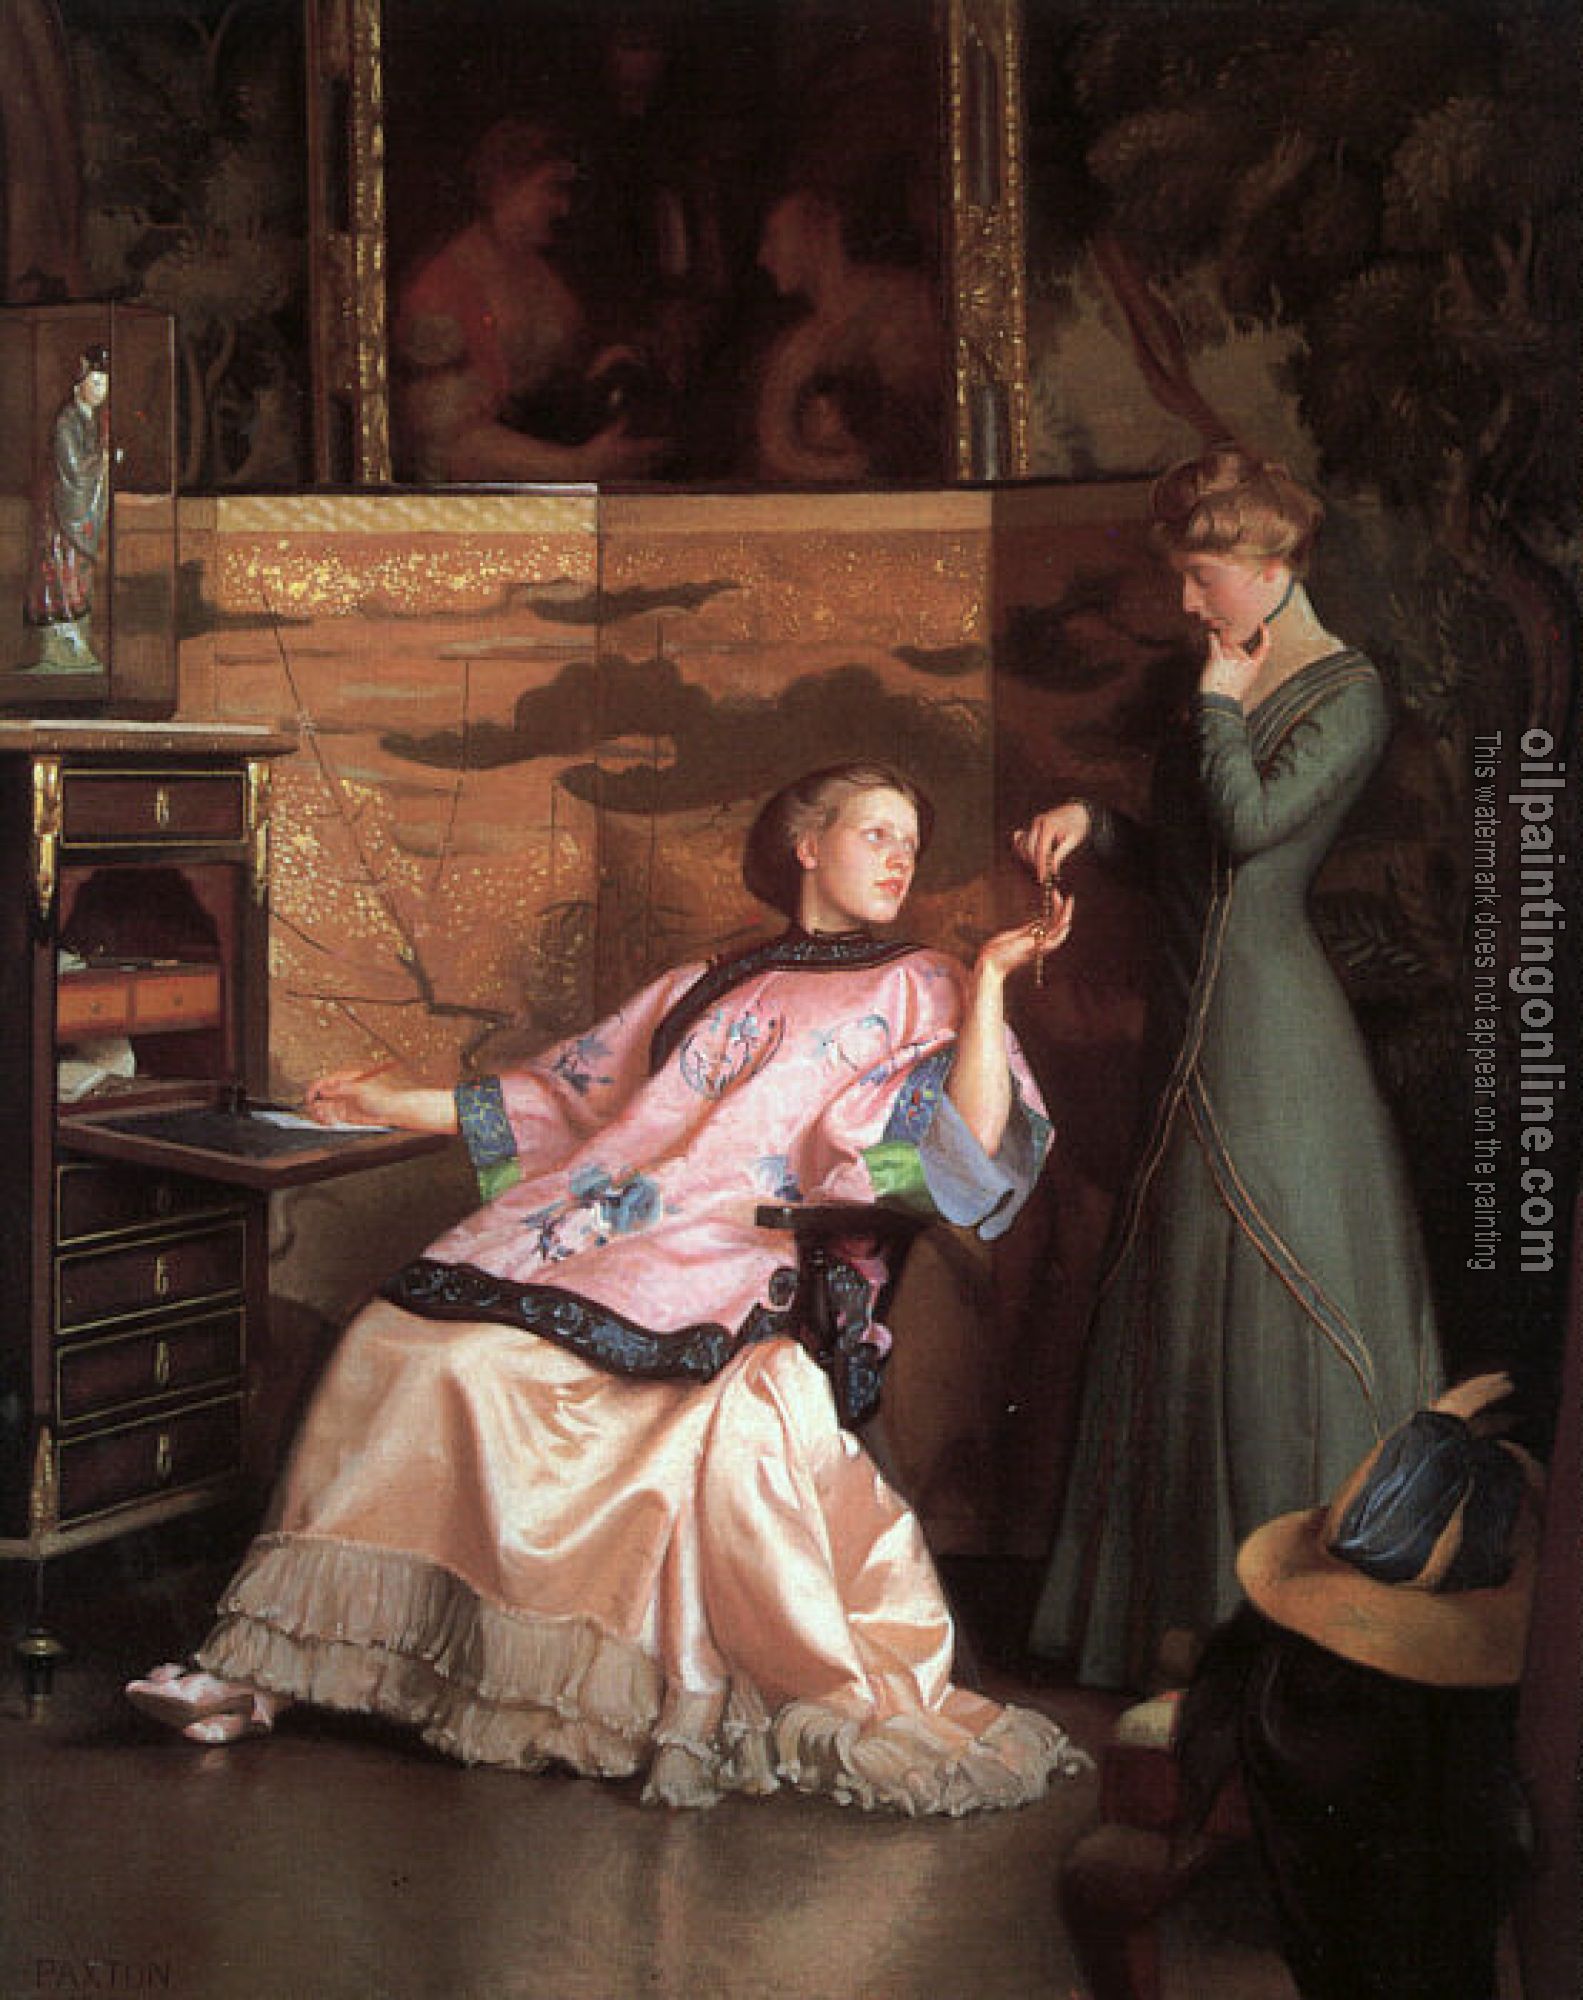 William McGregor Paxton - The New Necklace